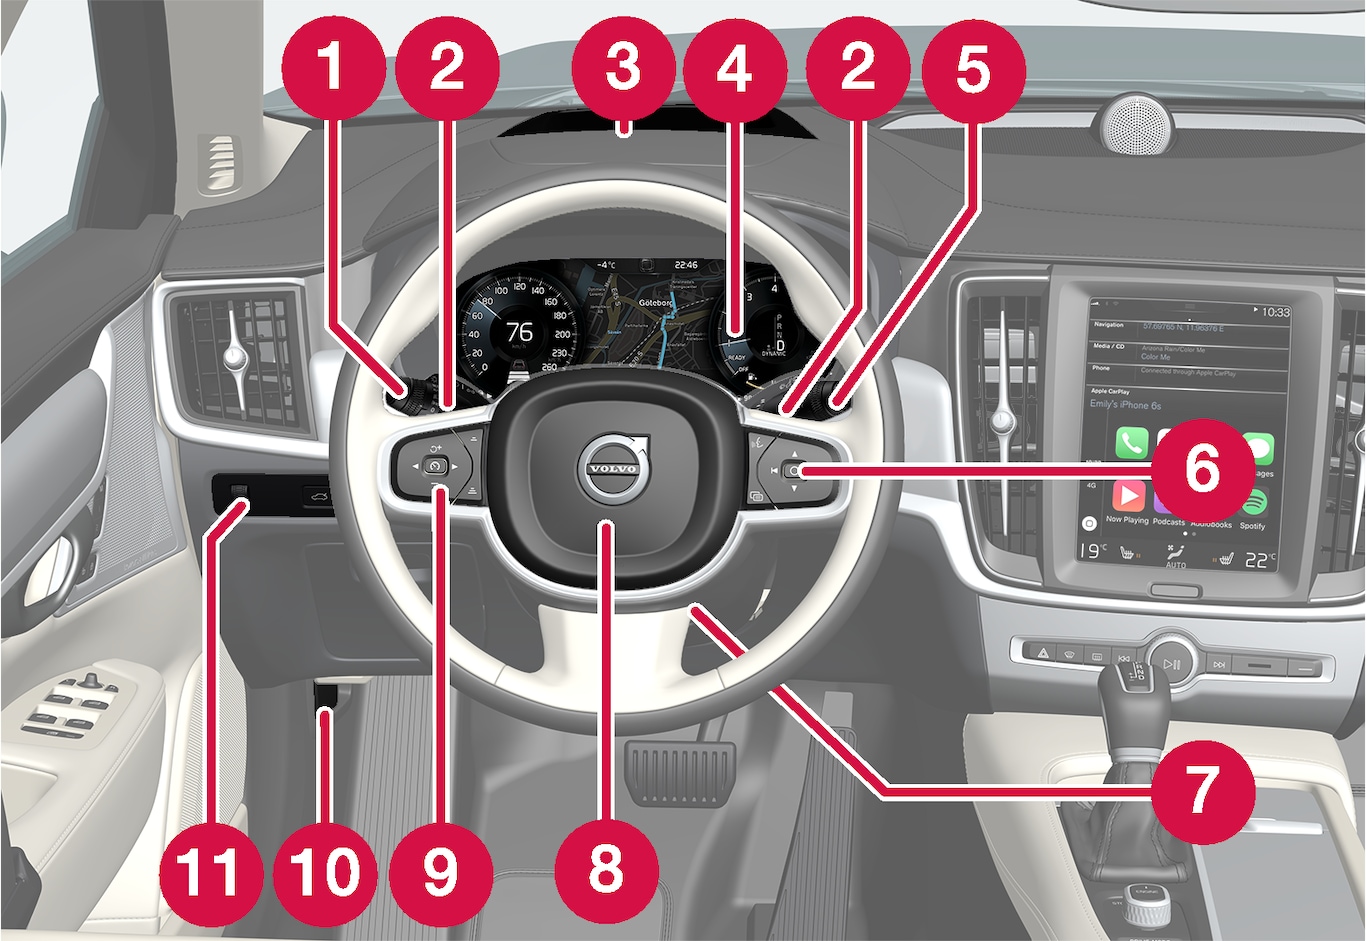 16w17 - SPA - Instruments and controls 1 LHD